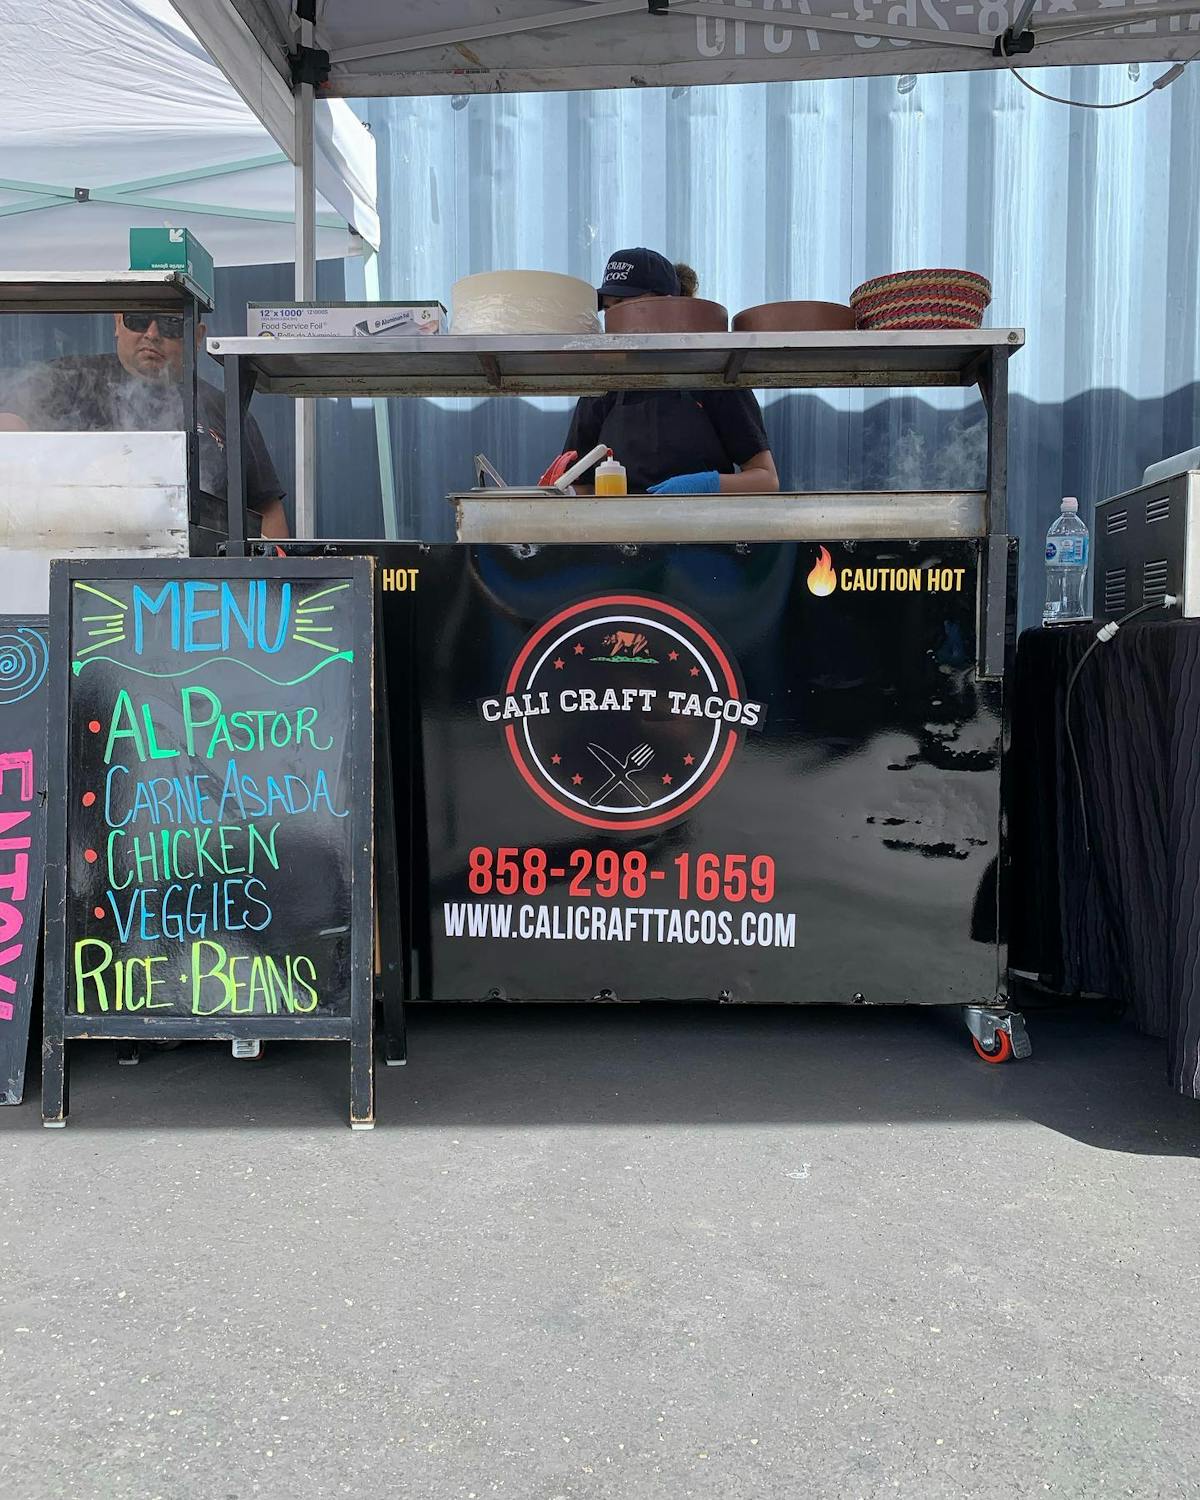 A grill on wheels with the Cali Craft Tacos logo with a menu board in front